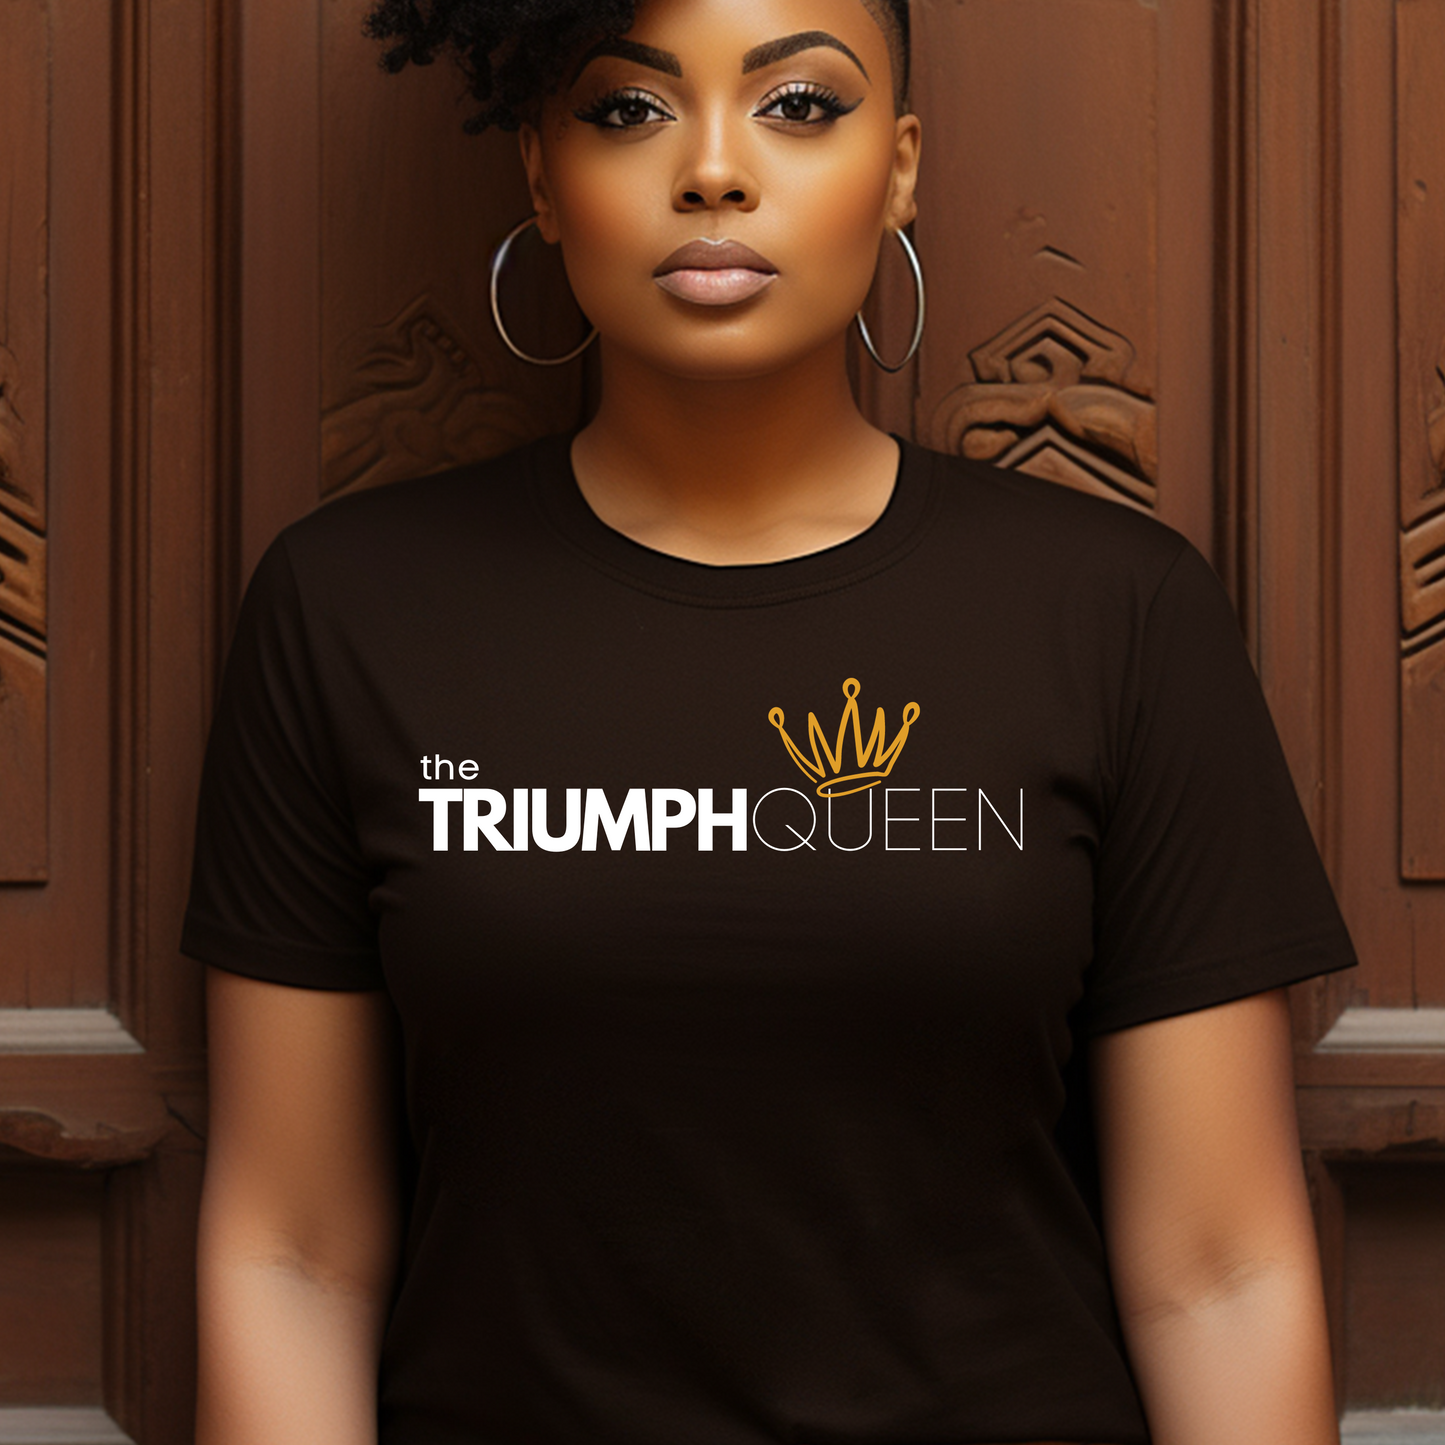 Chocolate Triumph Queen T-shirt from Triumph Tees, a faith-based clothing brand. This high-quality Christian t-shirt features a bold, white logo in the centre, epitomizing faith and empowerment. Perfect for those seeking fashionable faith apparel.